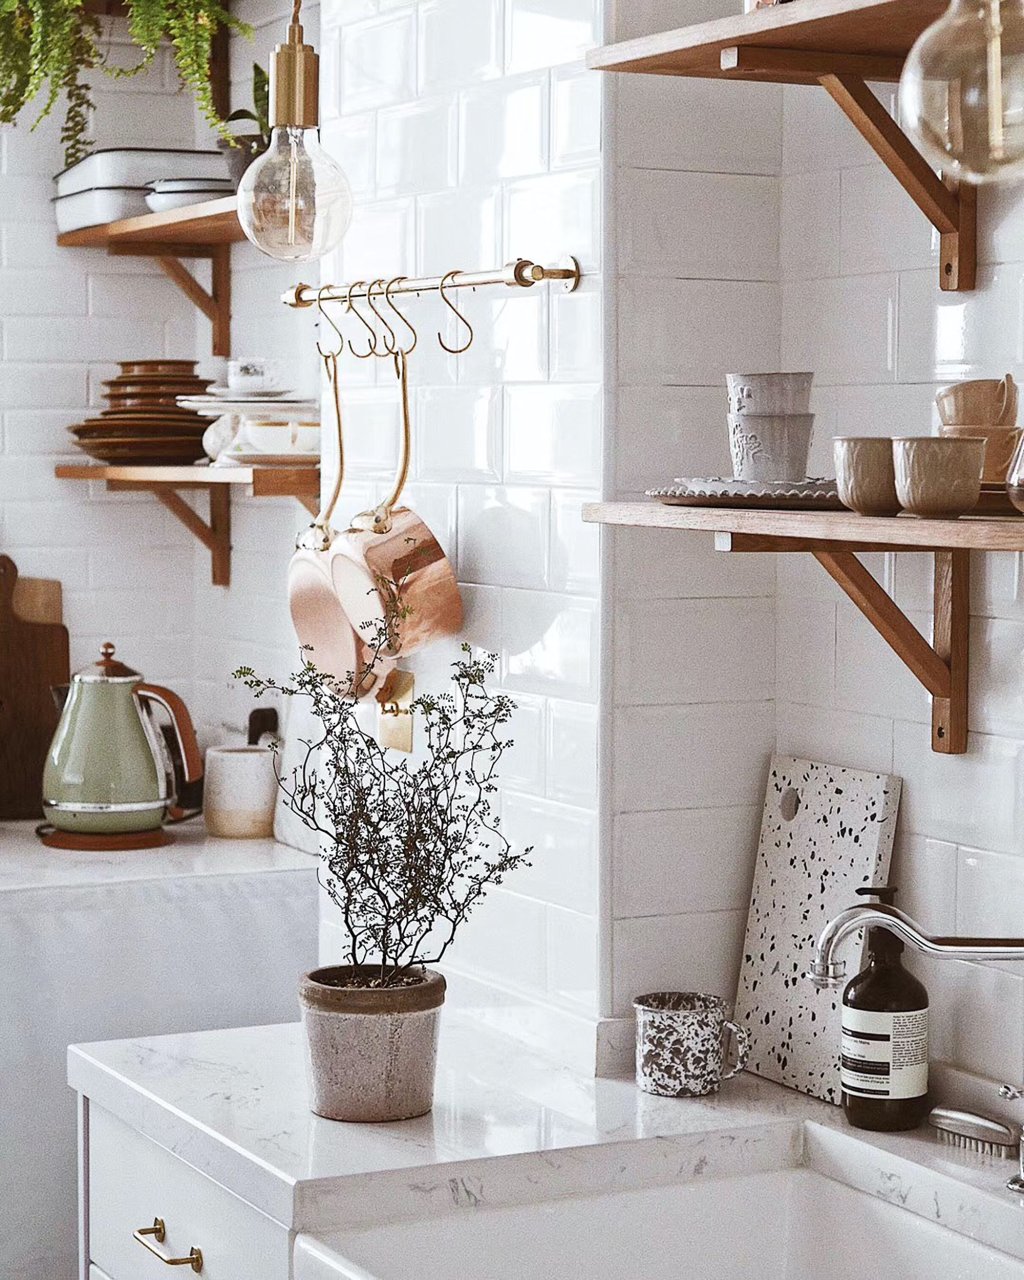 Timeless white kitchen. Picture by UnSplash.